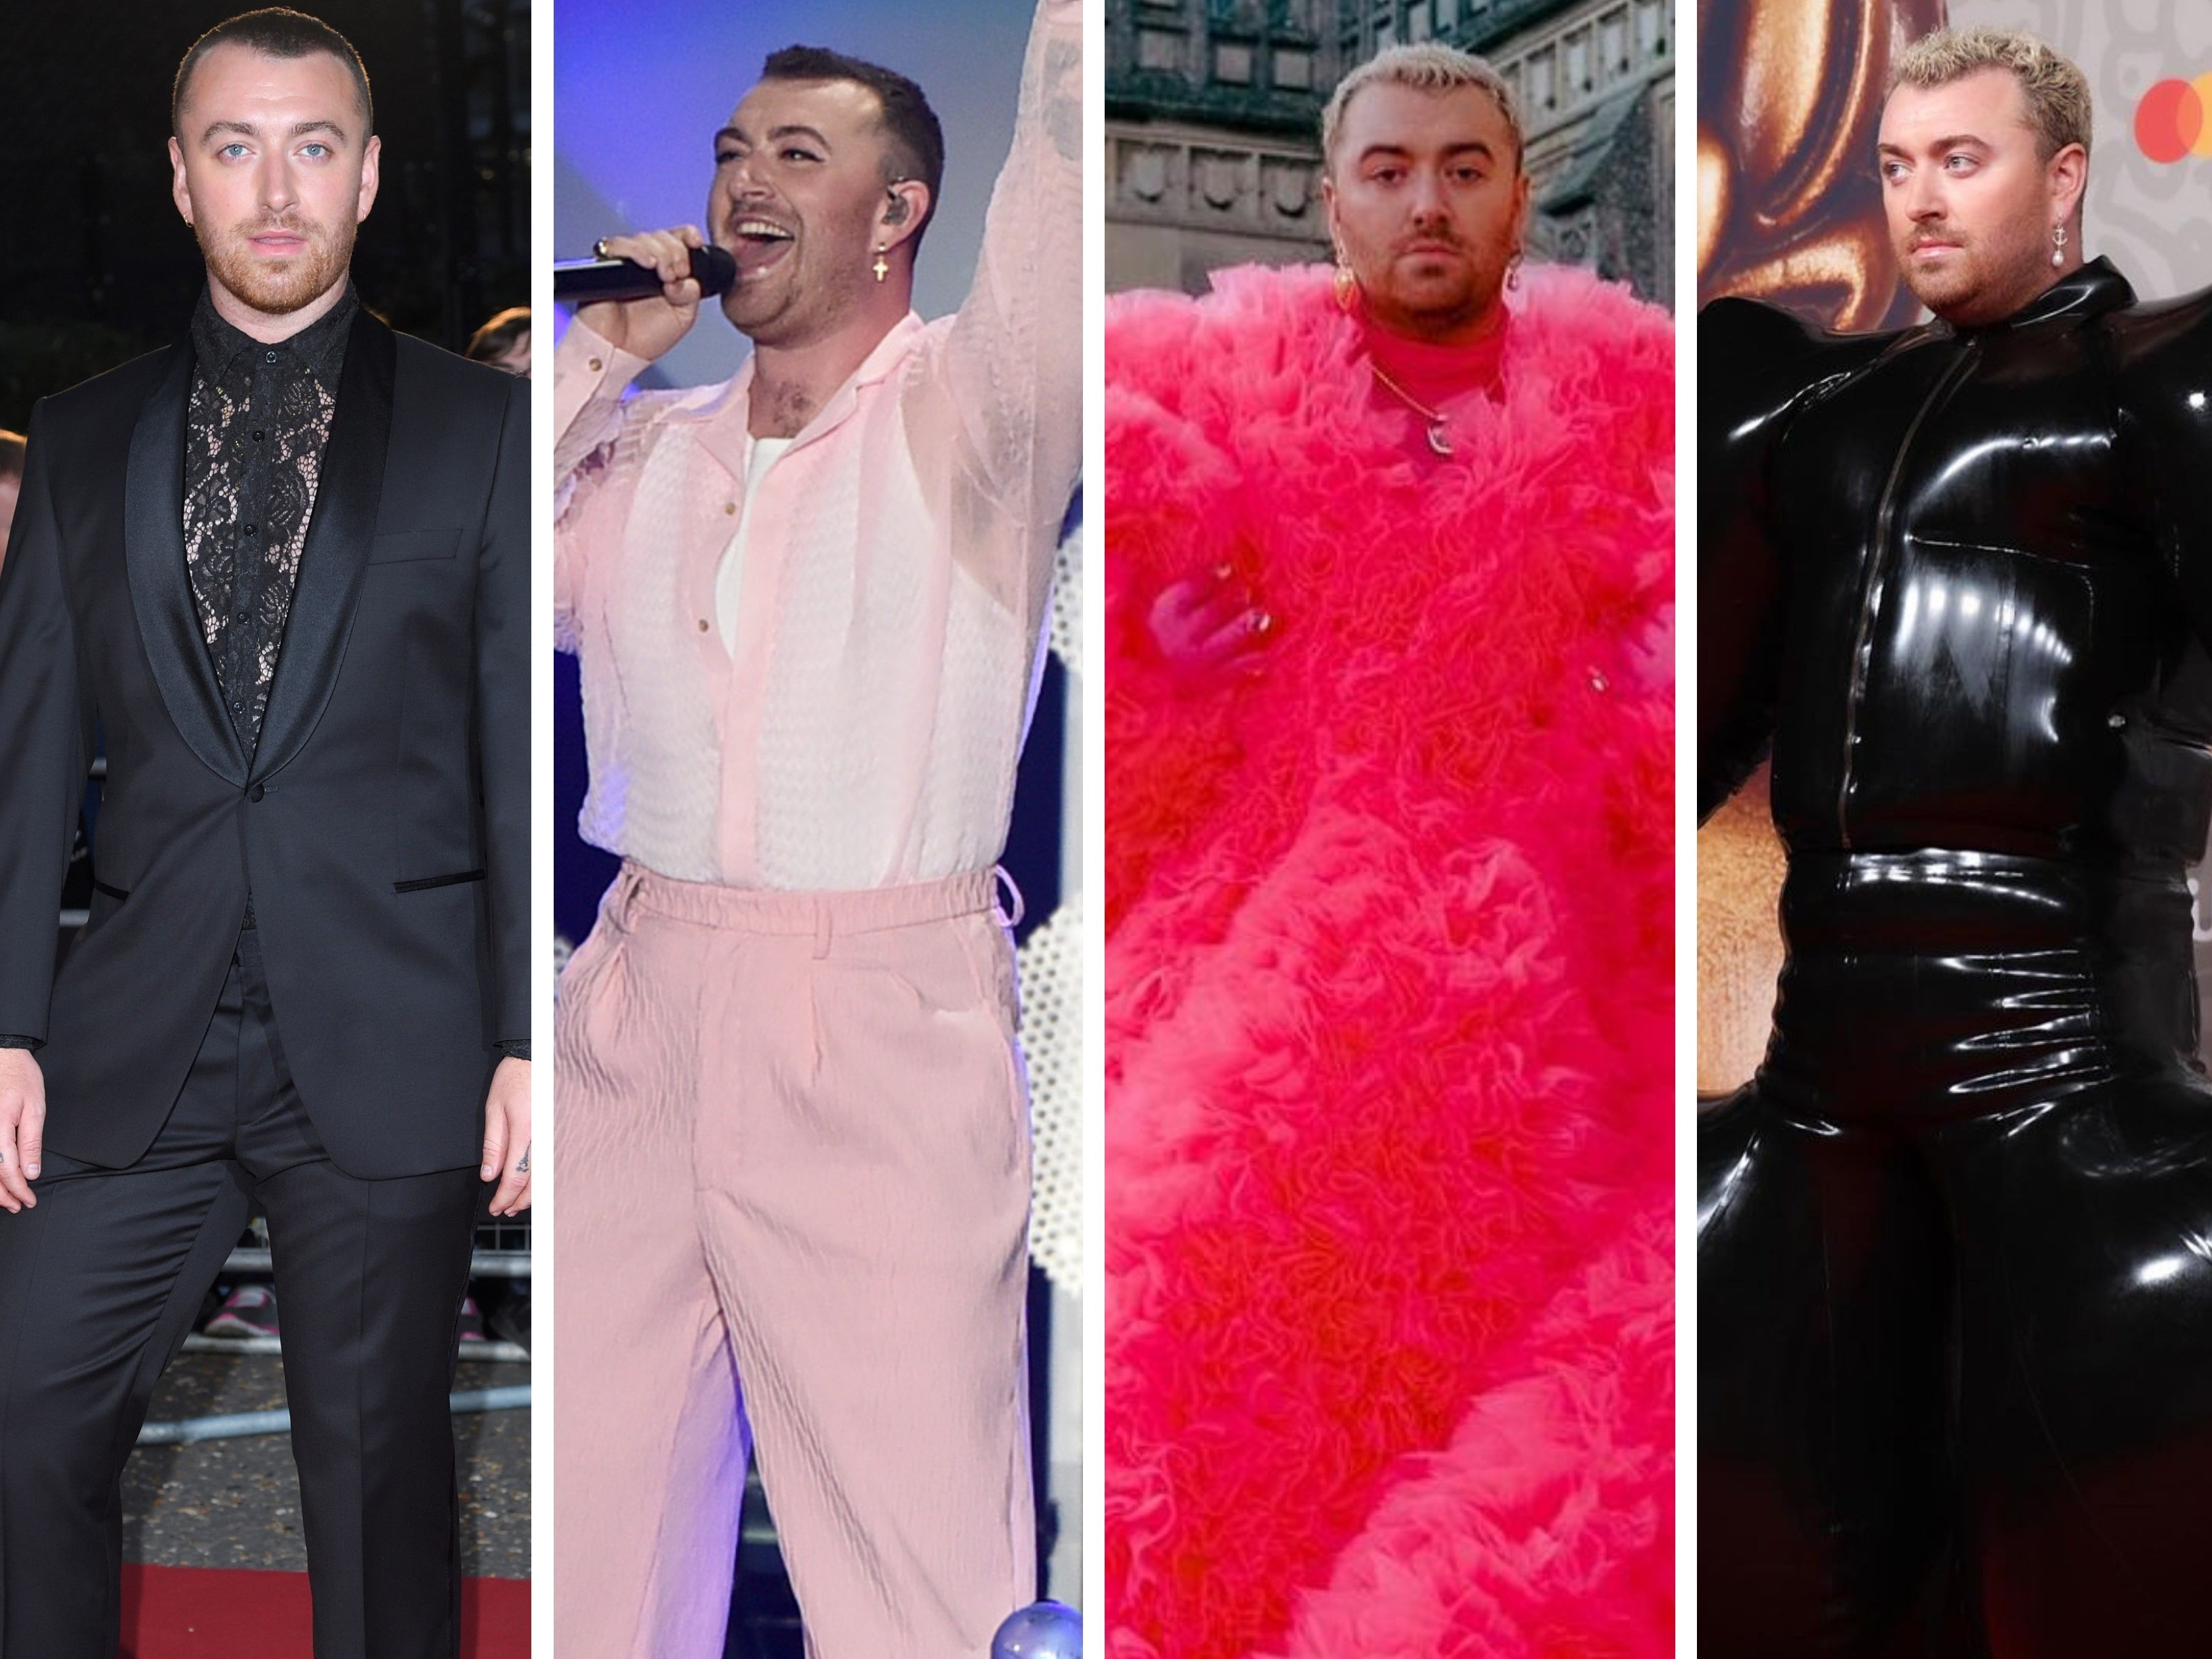 Sam Smith has donned some truly statement-making looks over the years. Photos: Getty Images